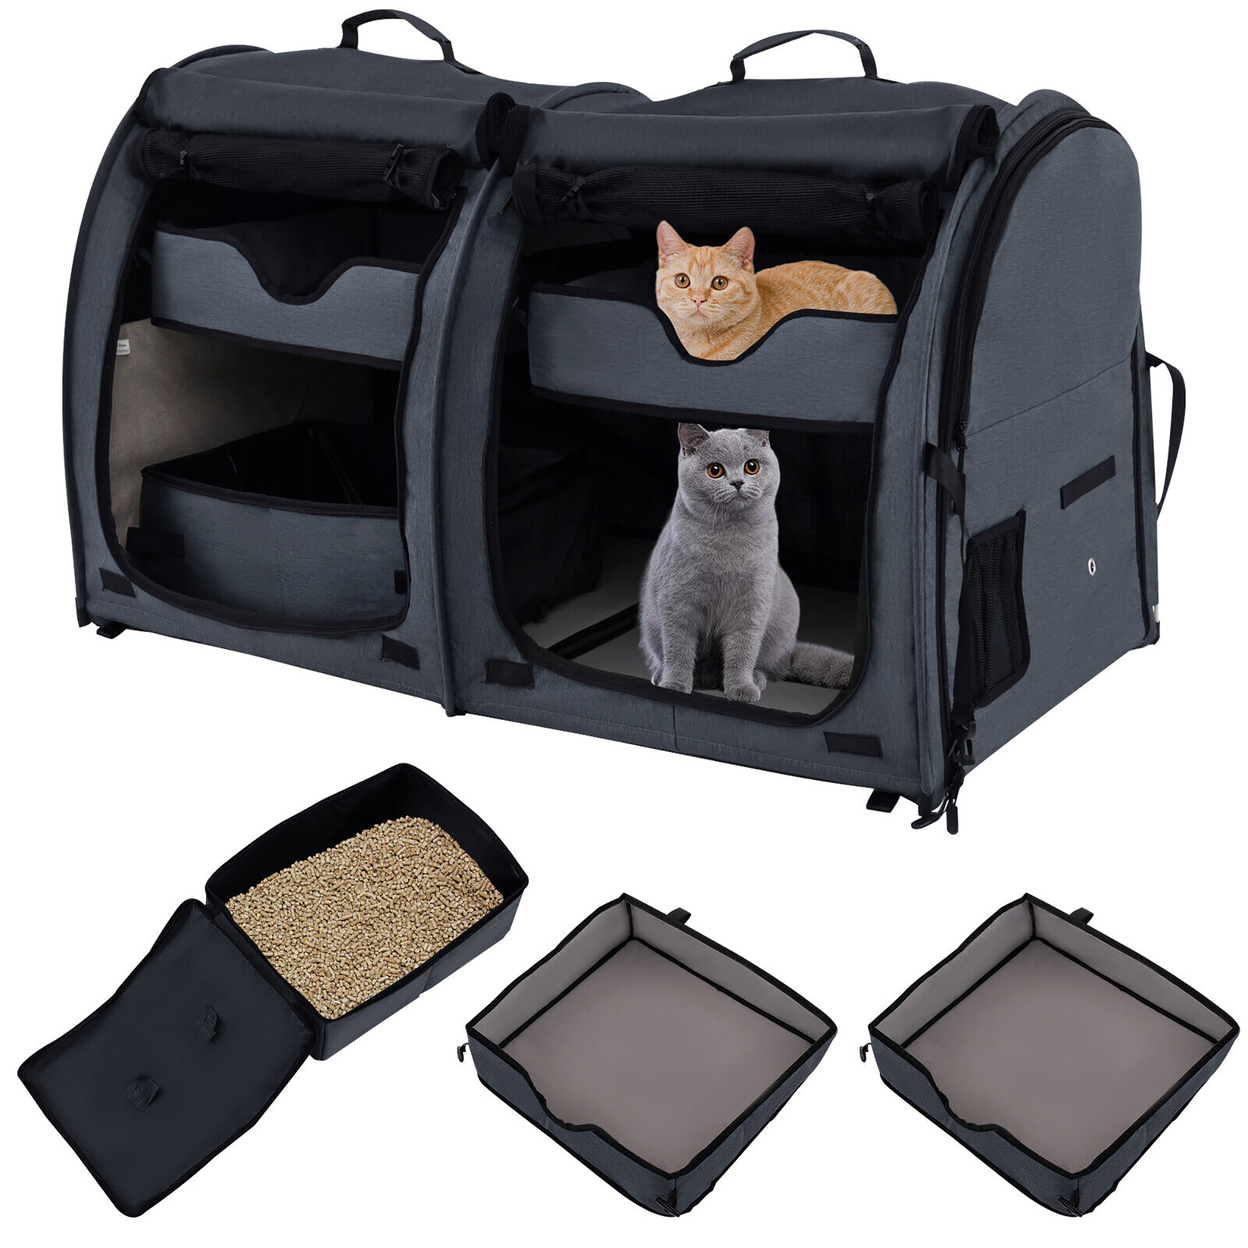 Double Compartment Pet Carrier Portable 3-in-1 Pet Kennel W/Carry Bag For Cats